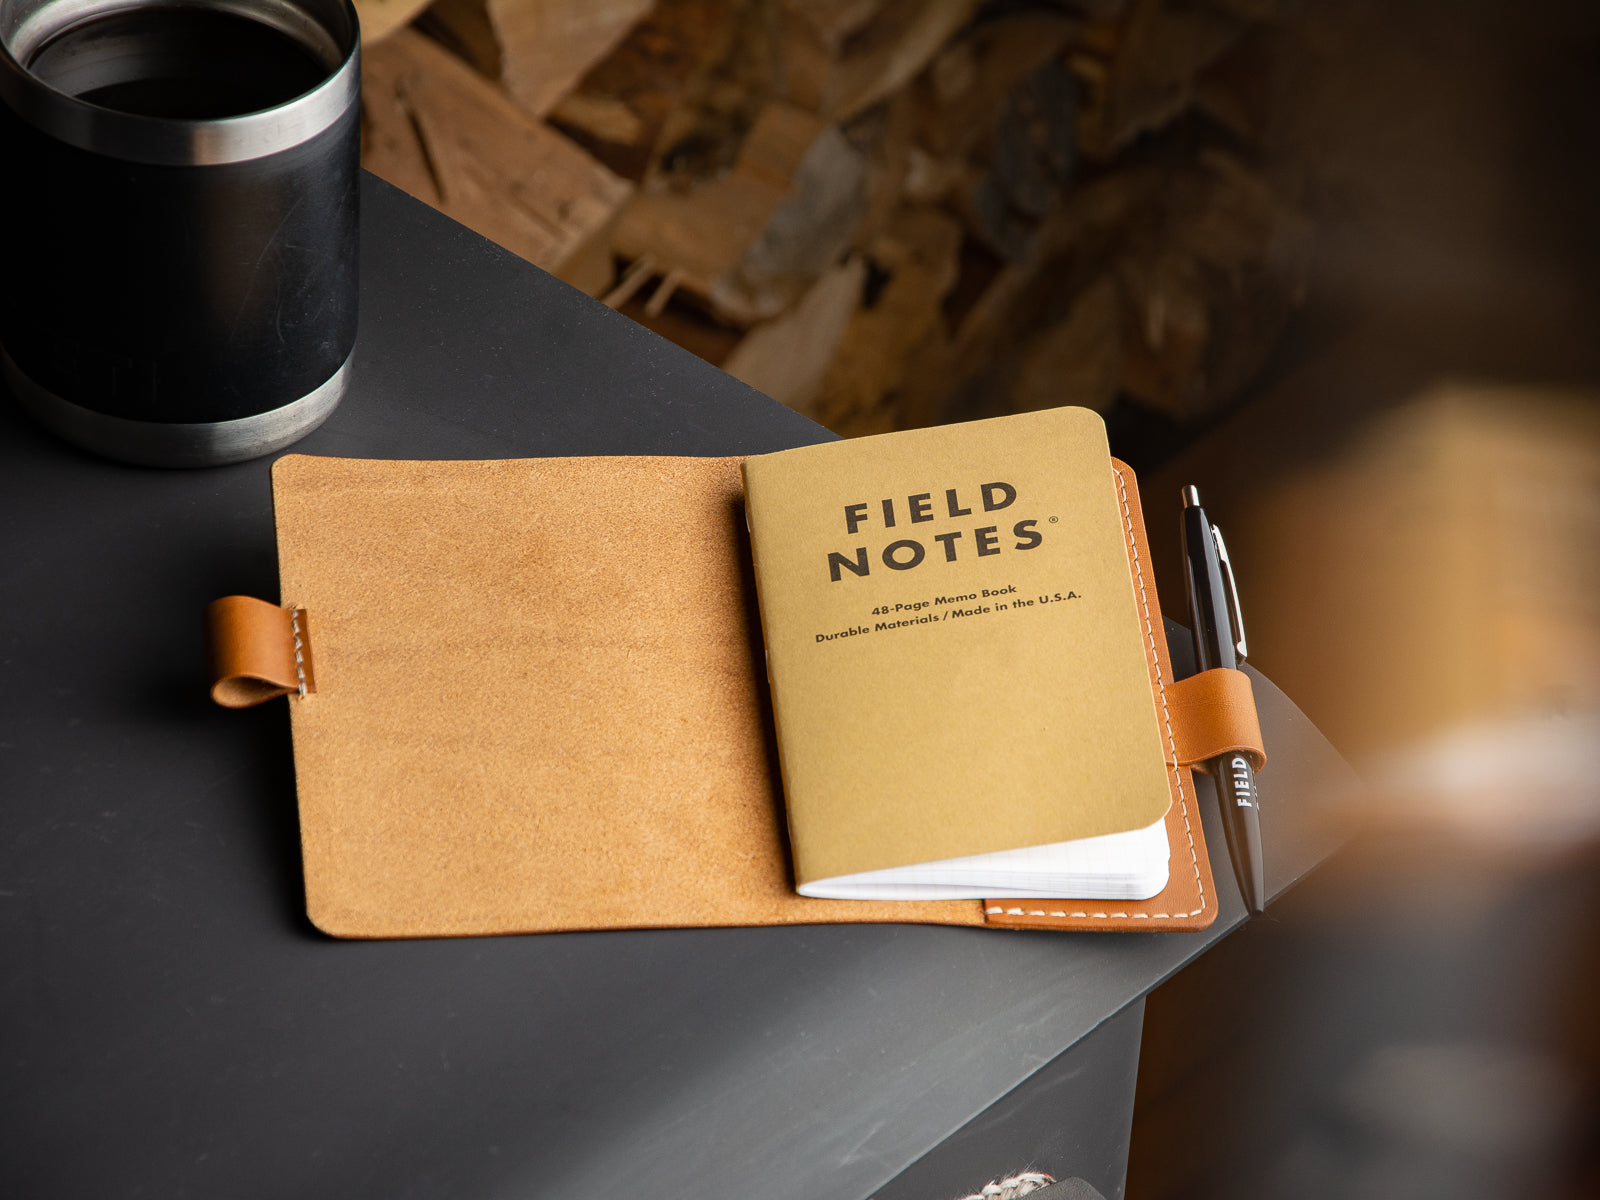 Field notes notebook and pan on a leather sleeve